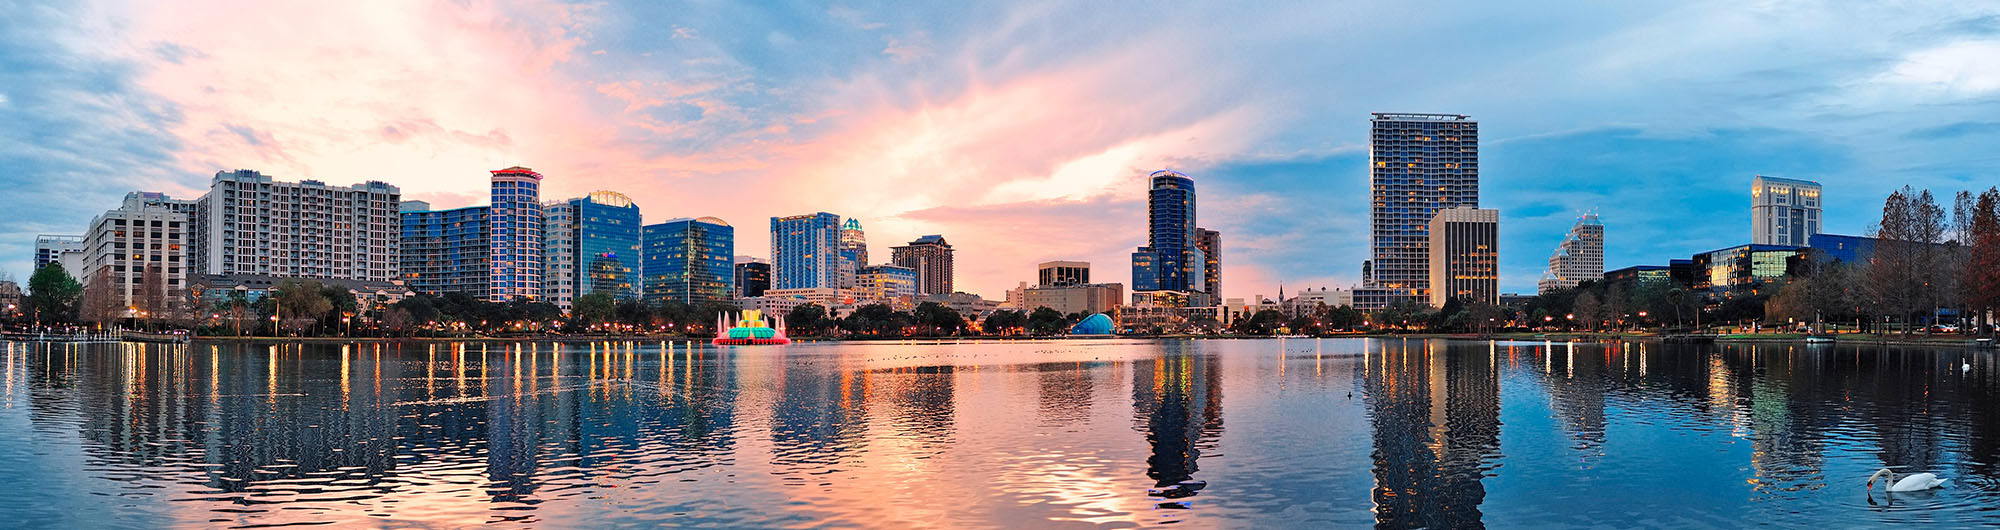 Search and compare cheap flights from Washington, D. C. to Orlando